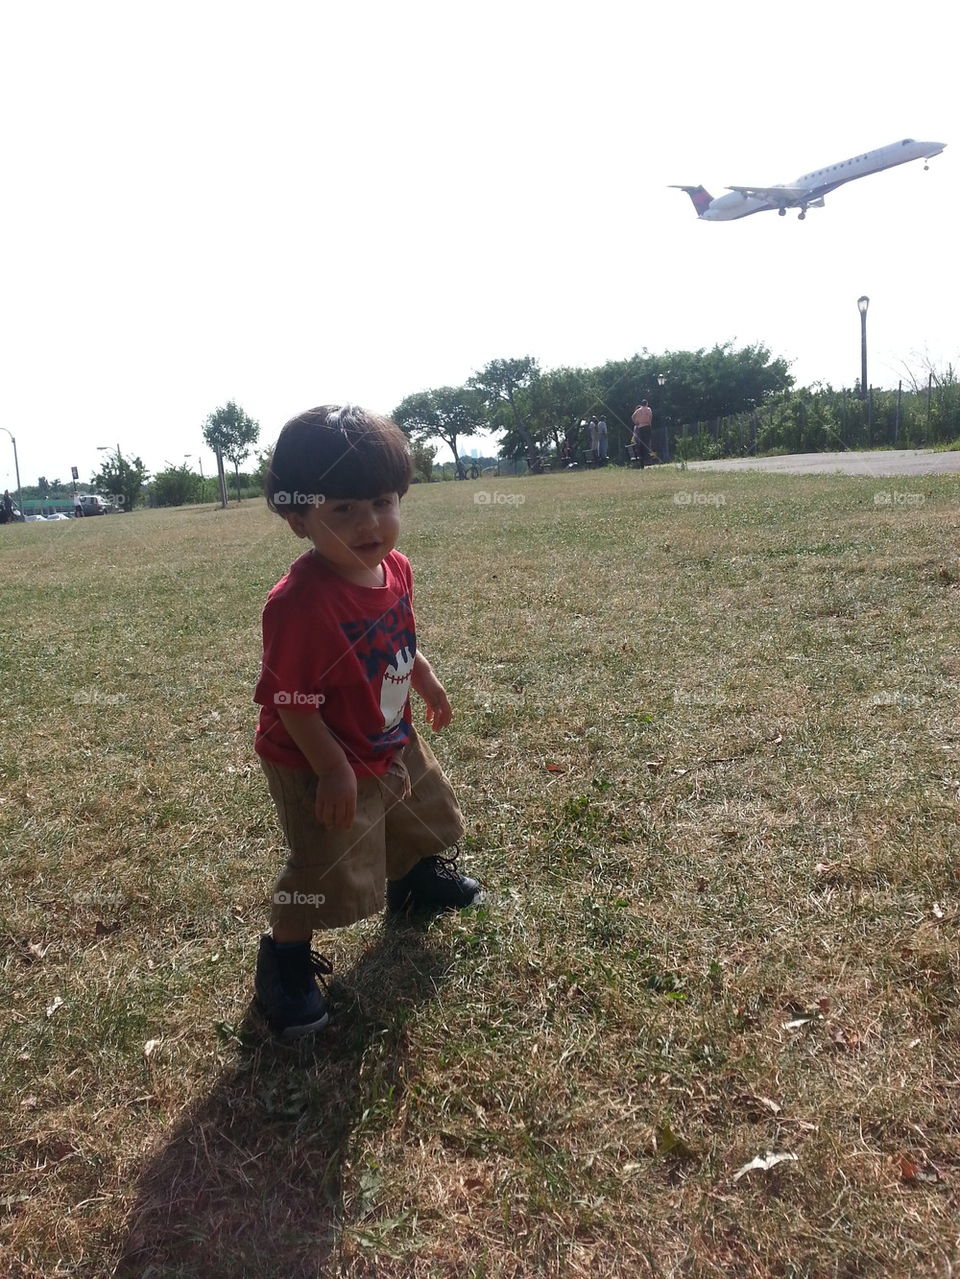 Baby and plane